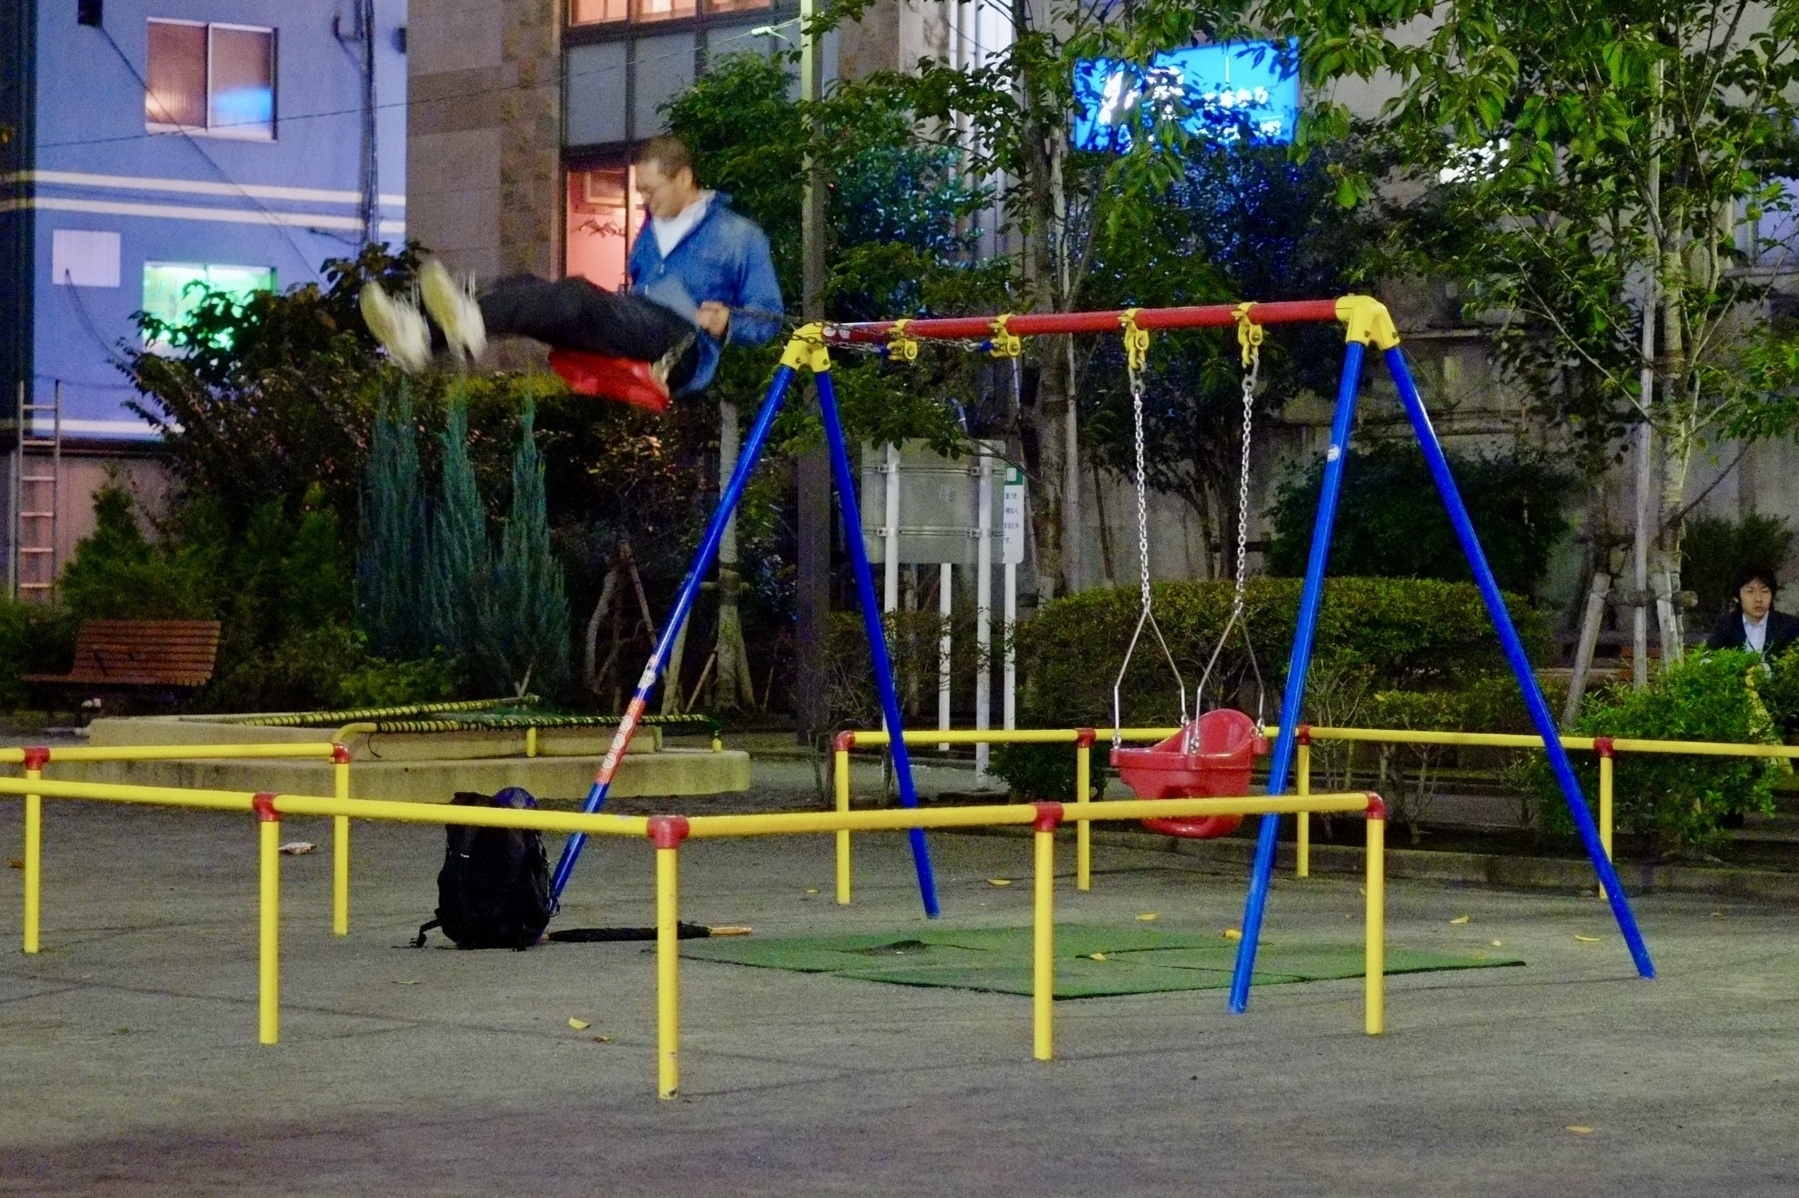 Adult man swings high on a childrens’ swingset at a park in Shimbashi Tokyo Japan. 